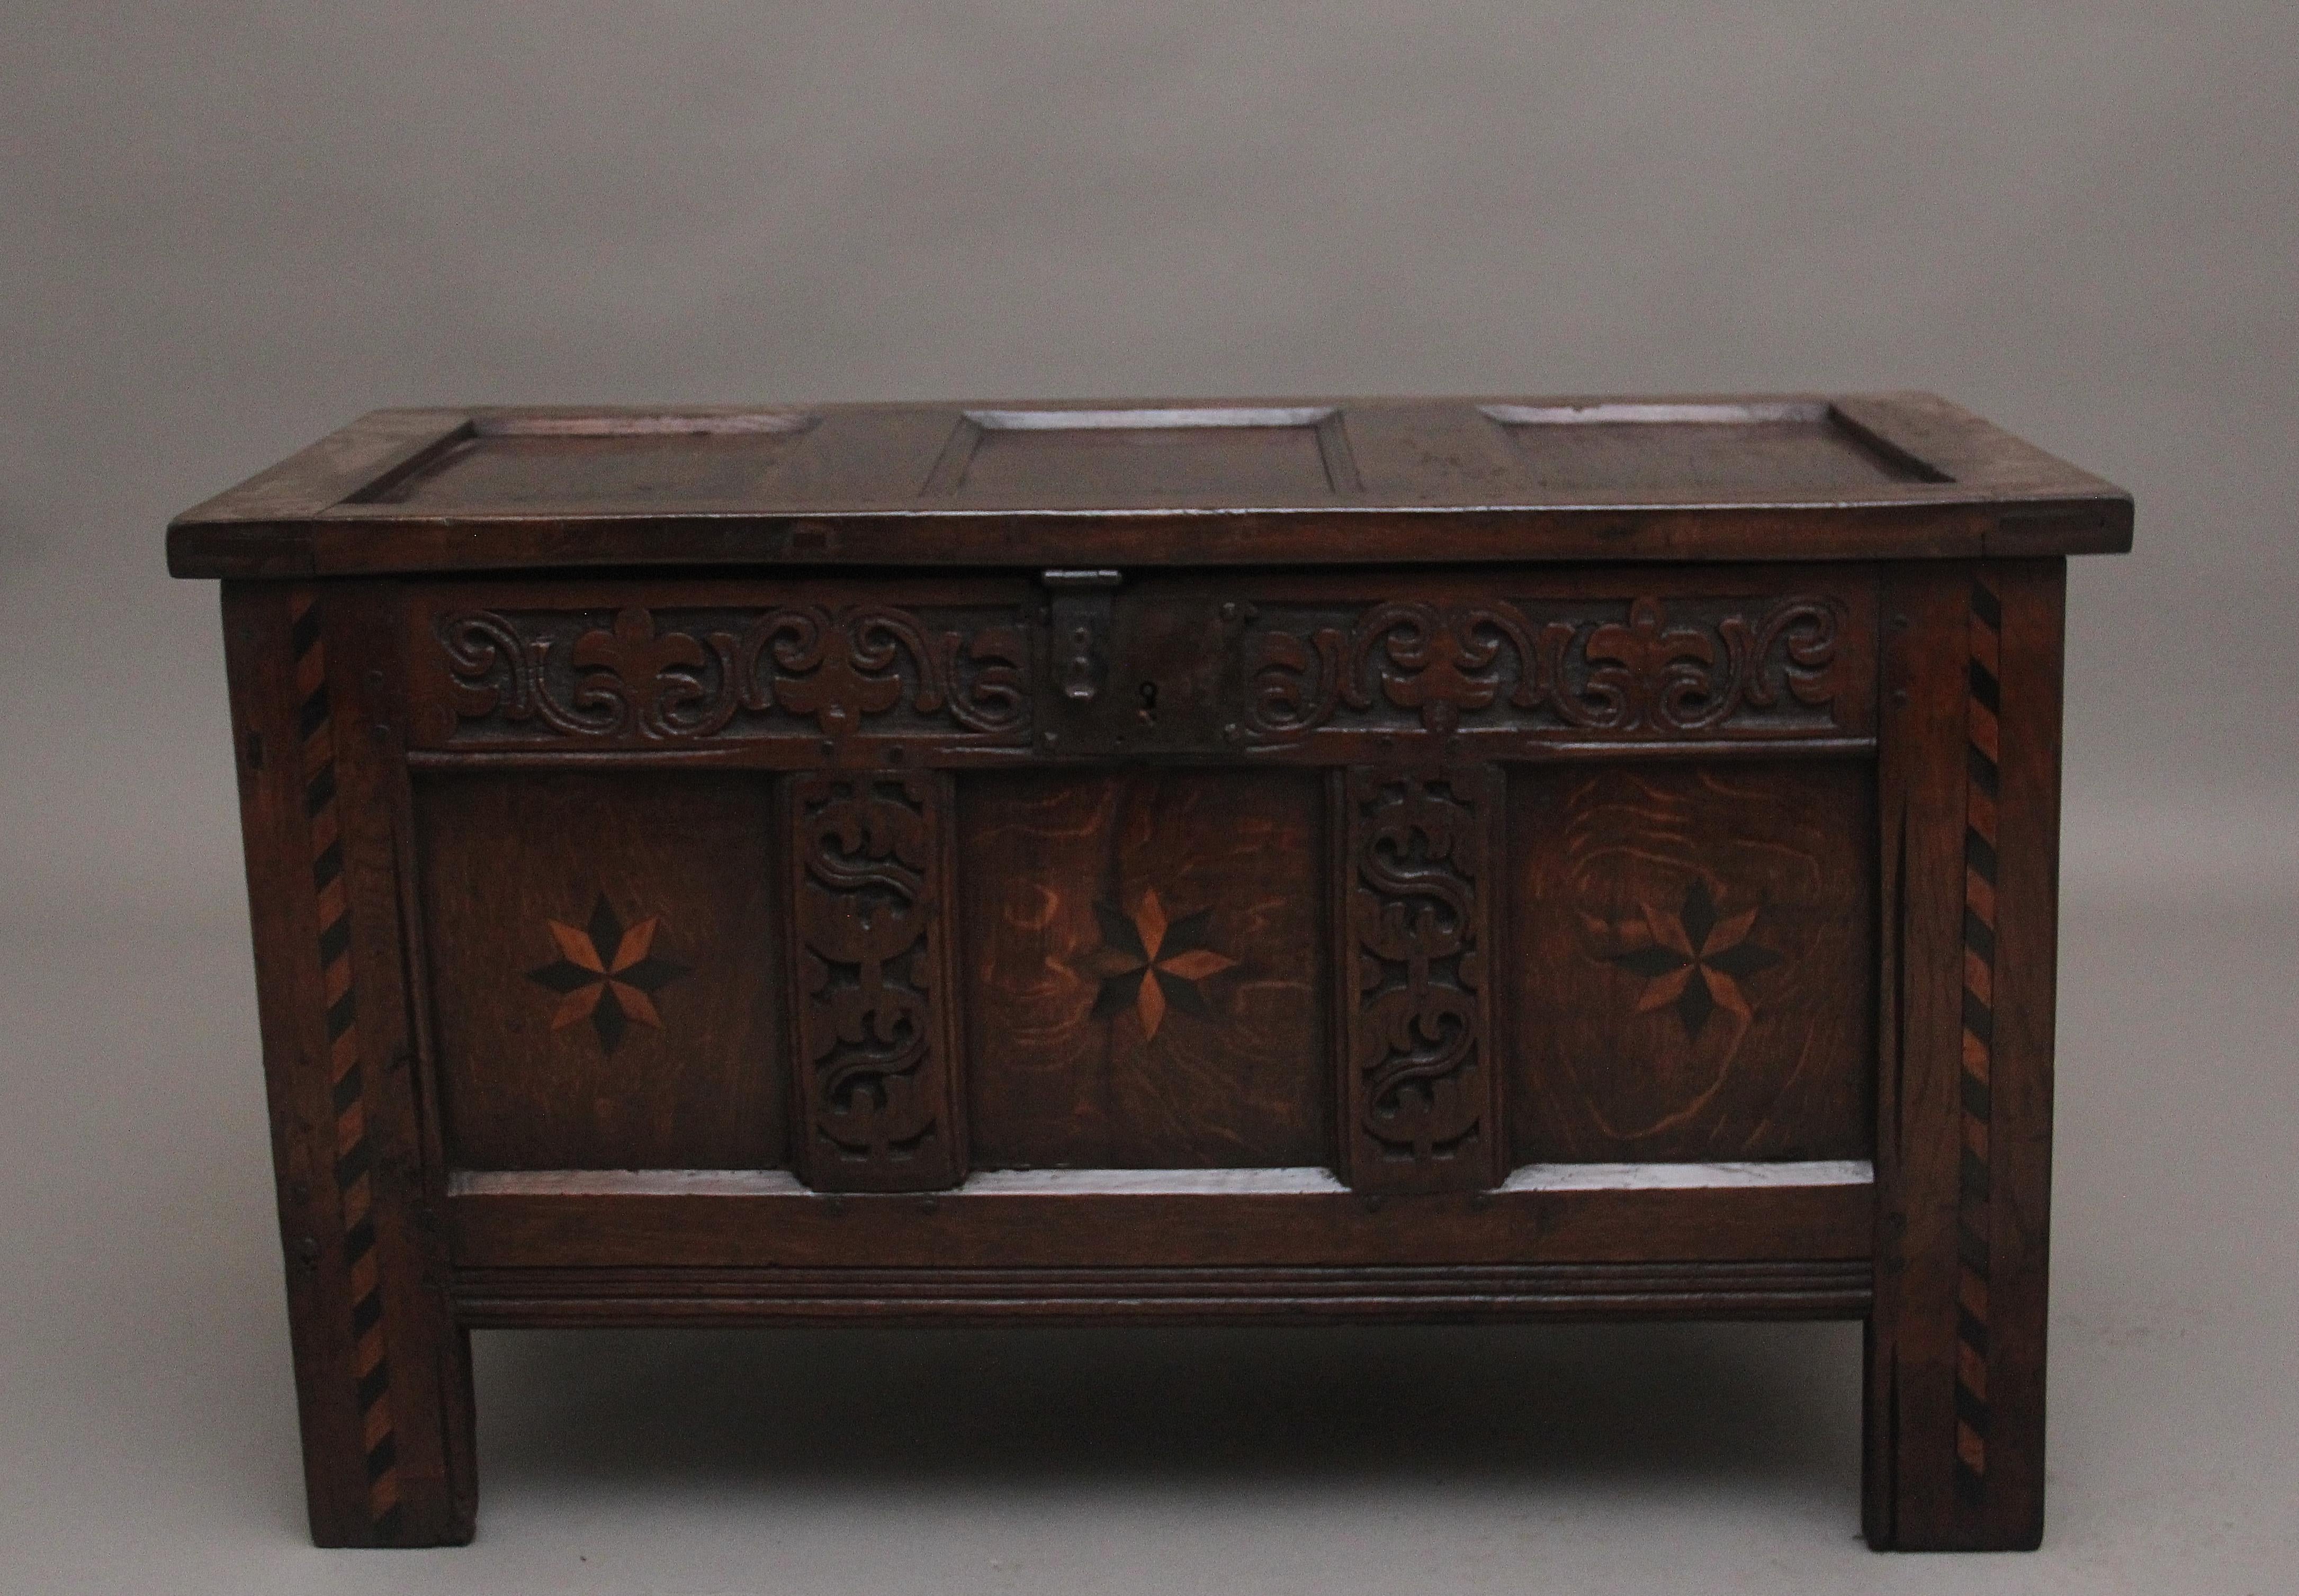 Early 18th Century carved and inlaid oak coffer, having a hinged three panelled top opening to reveal a large compartment space, the three panelled front having wonderful decorative carving,  two tone star inlay on each panel with decorative